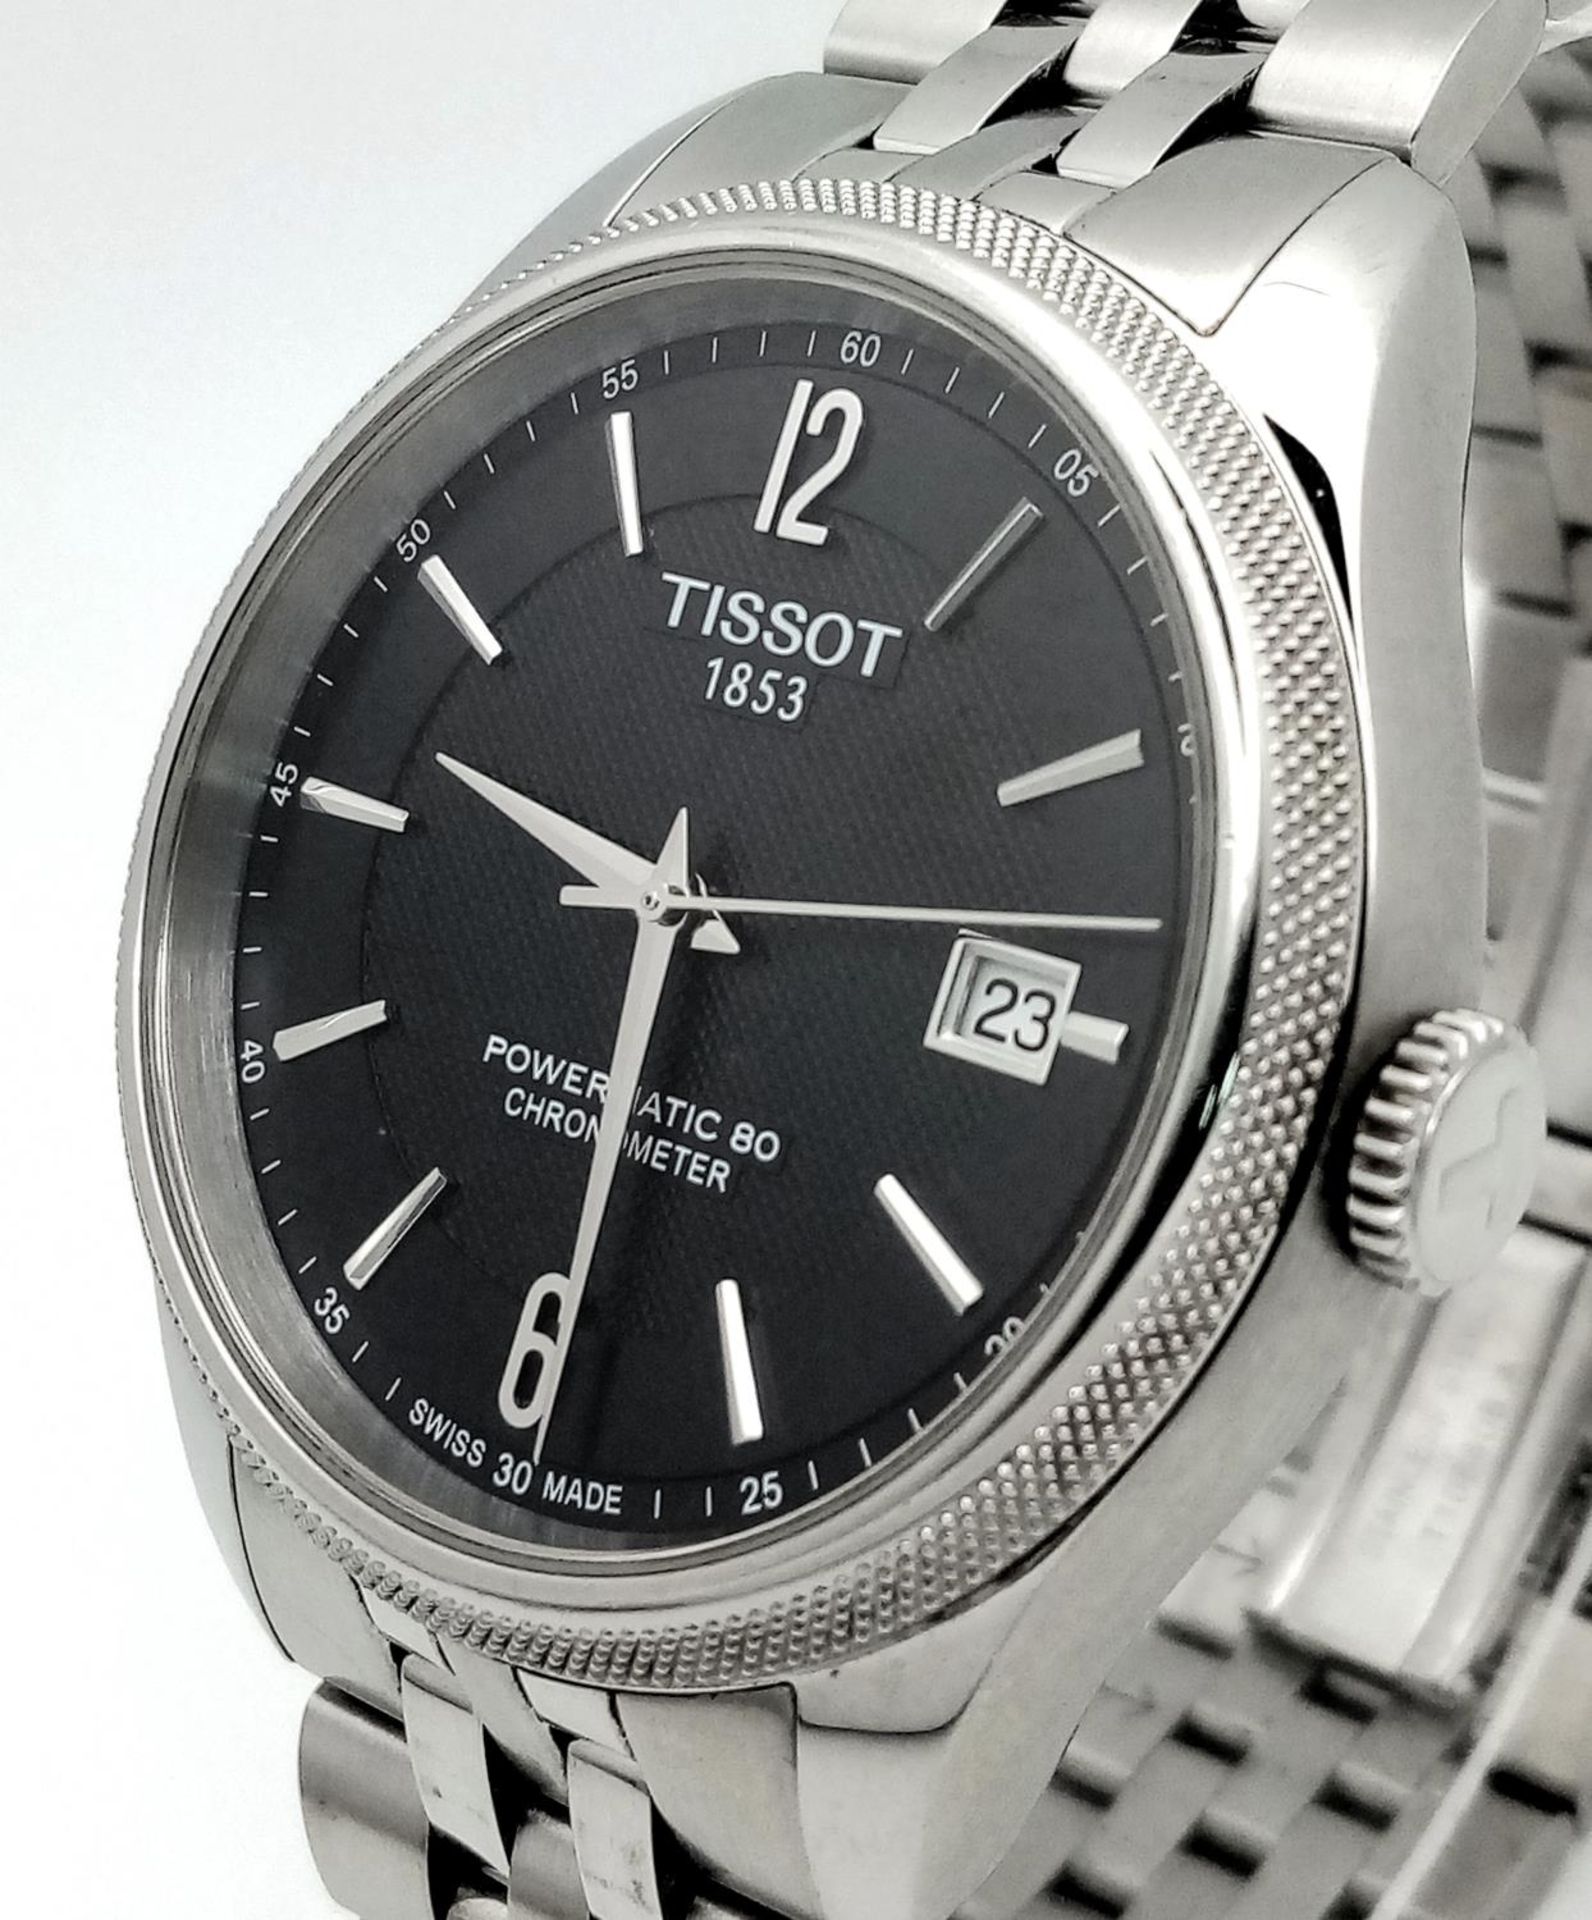 A Tissot Powermatic 80 Gents Watch. Stainless steel bracelet and case - 41mm. Black dial with date - Bild 5 aus 28